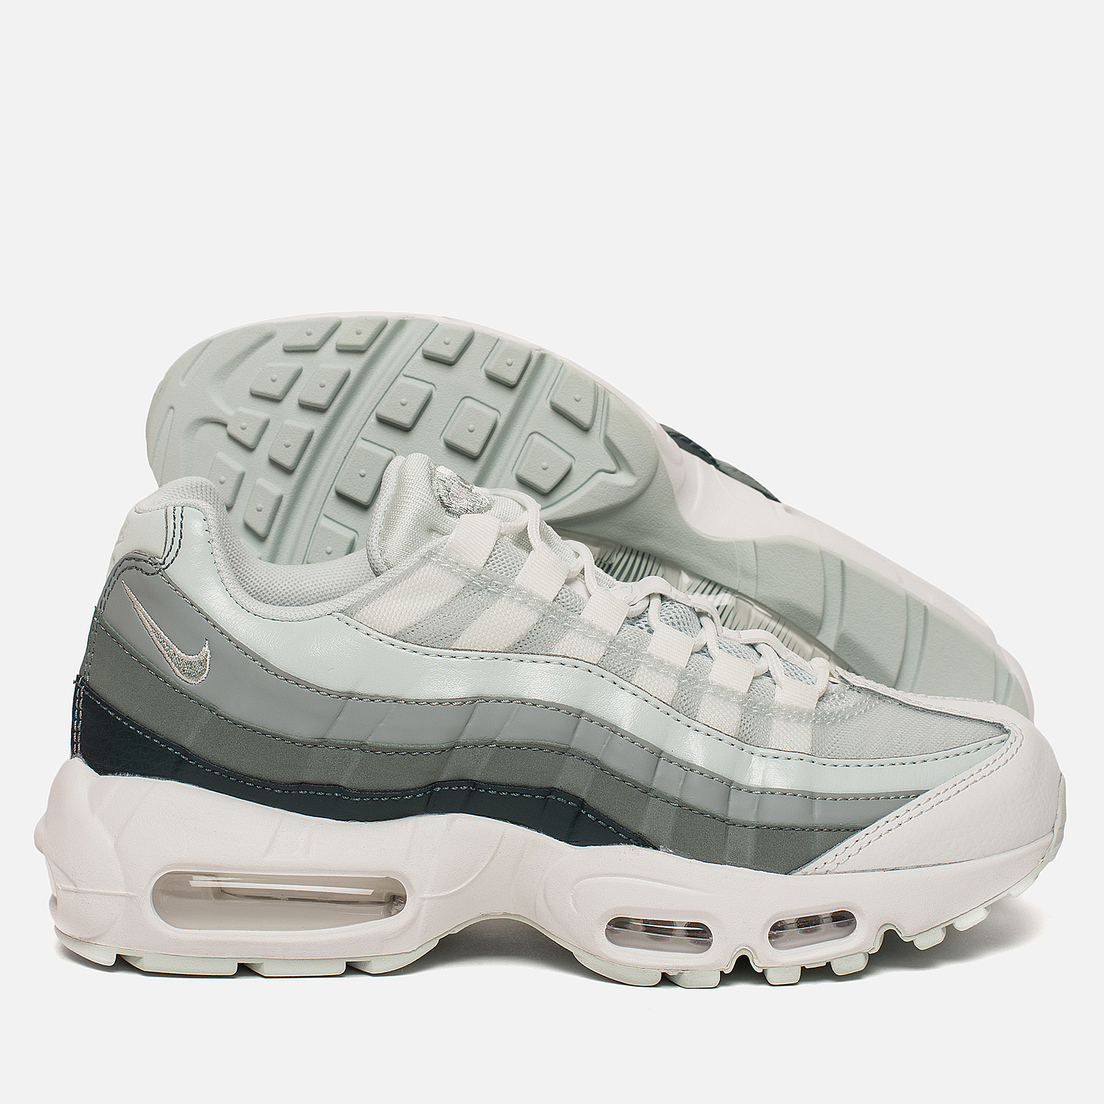 Nike Женские кроссовки Air Max 95 Barely